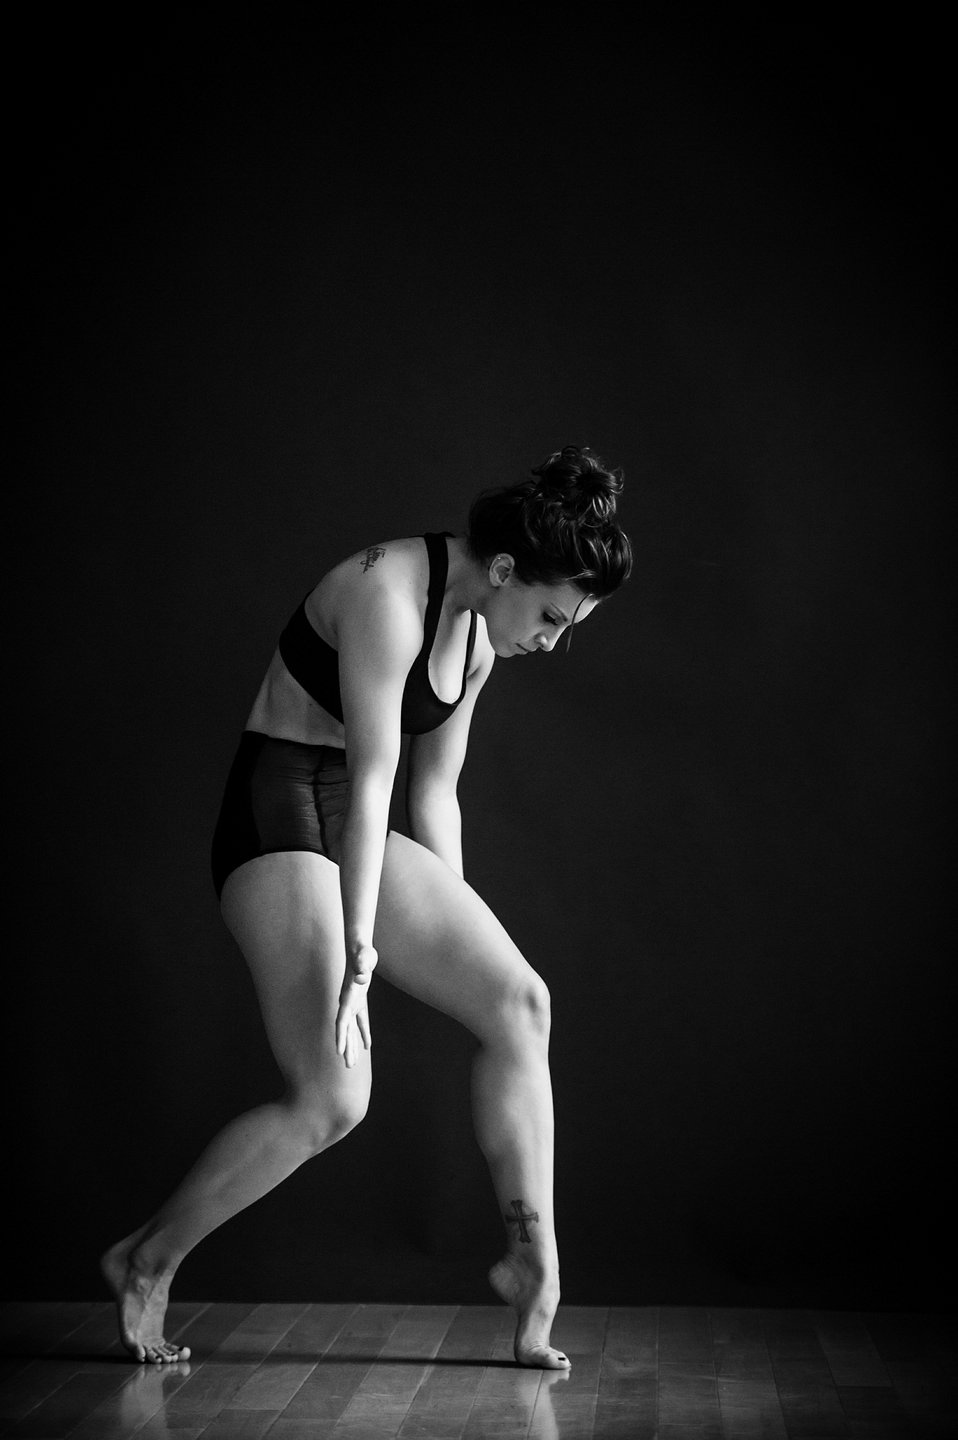 Los Angeles Dance Portrait Photo - Stephanie Abrams - by Tommy Xing Photography 03.jpg